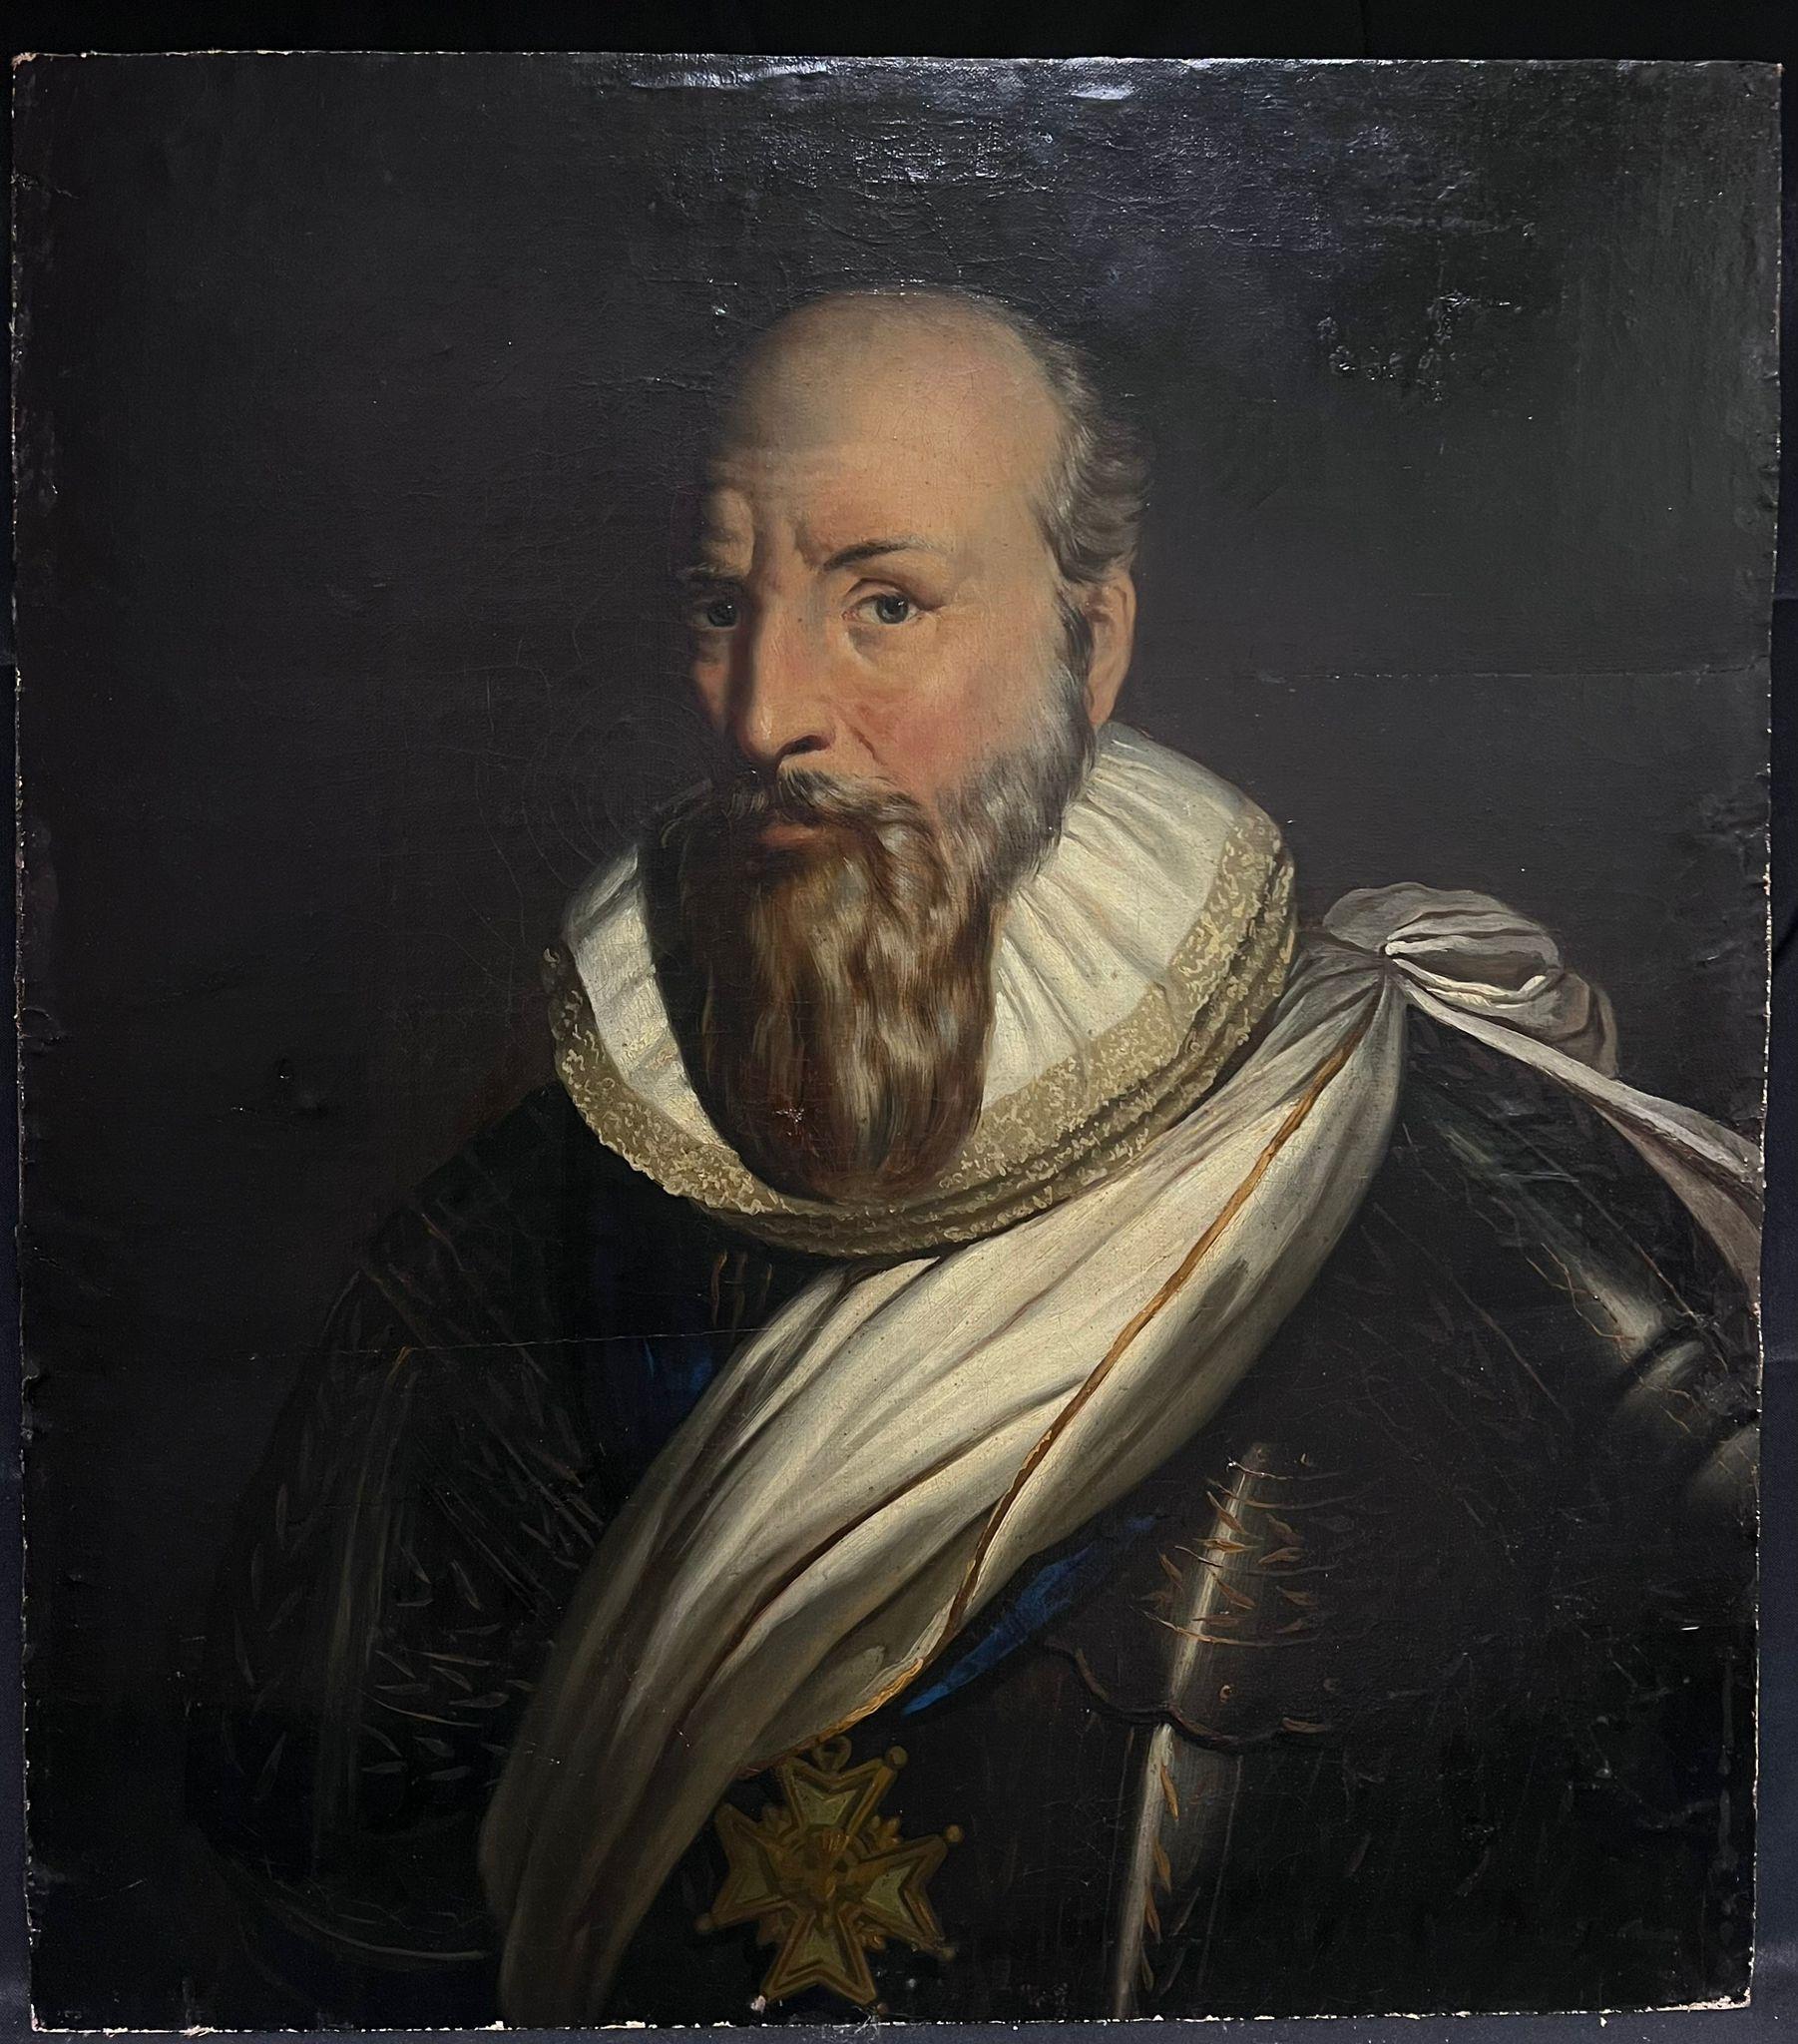 Portrait of a Gentleman in Ruff Collar and Robes
Dutch School, 18th century
oil on canvas laid over panel, unframed
board: 28.5 x 24 inches
provenance: private collection
condition: good and sound condition, signs of age, former retouchings and